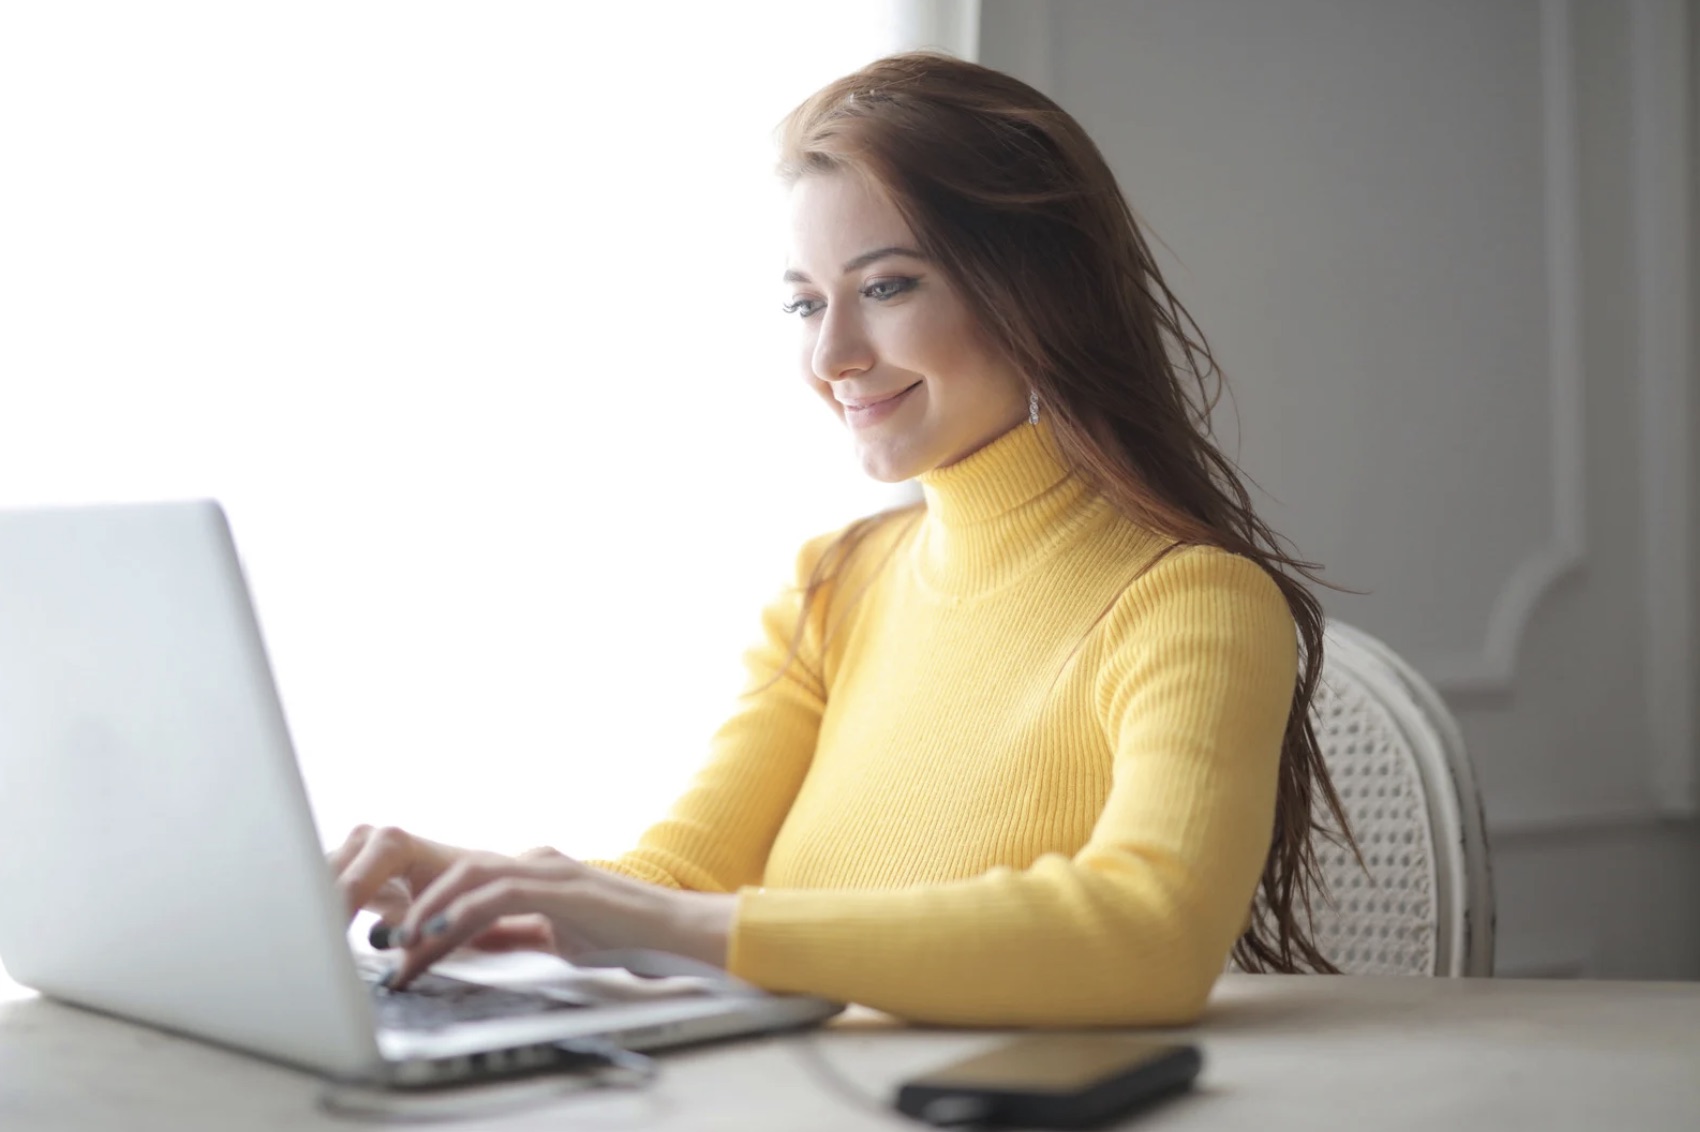 A smiling woman wearing a yellow jumper working on her laptop.